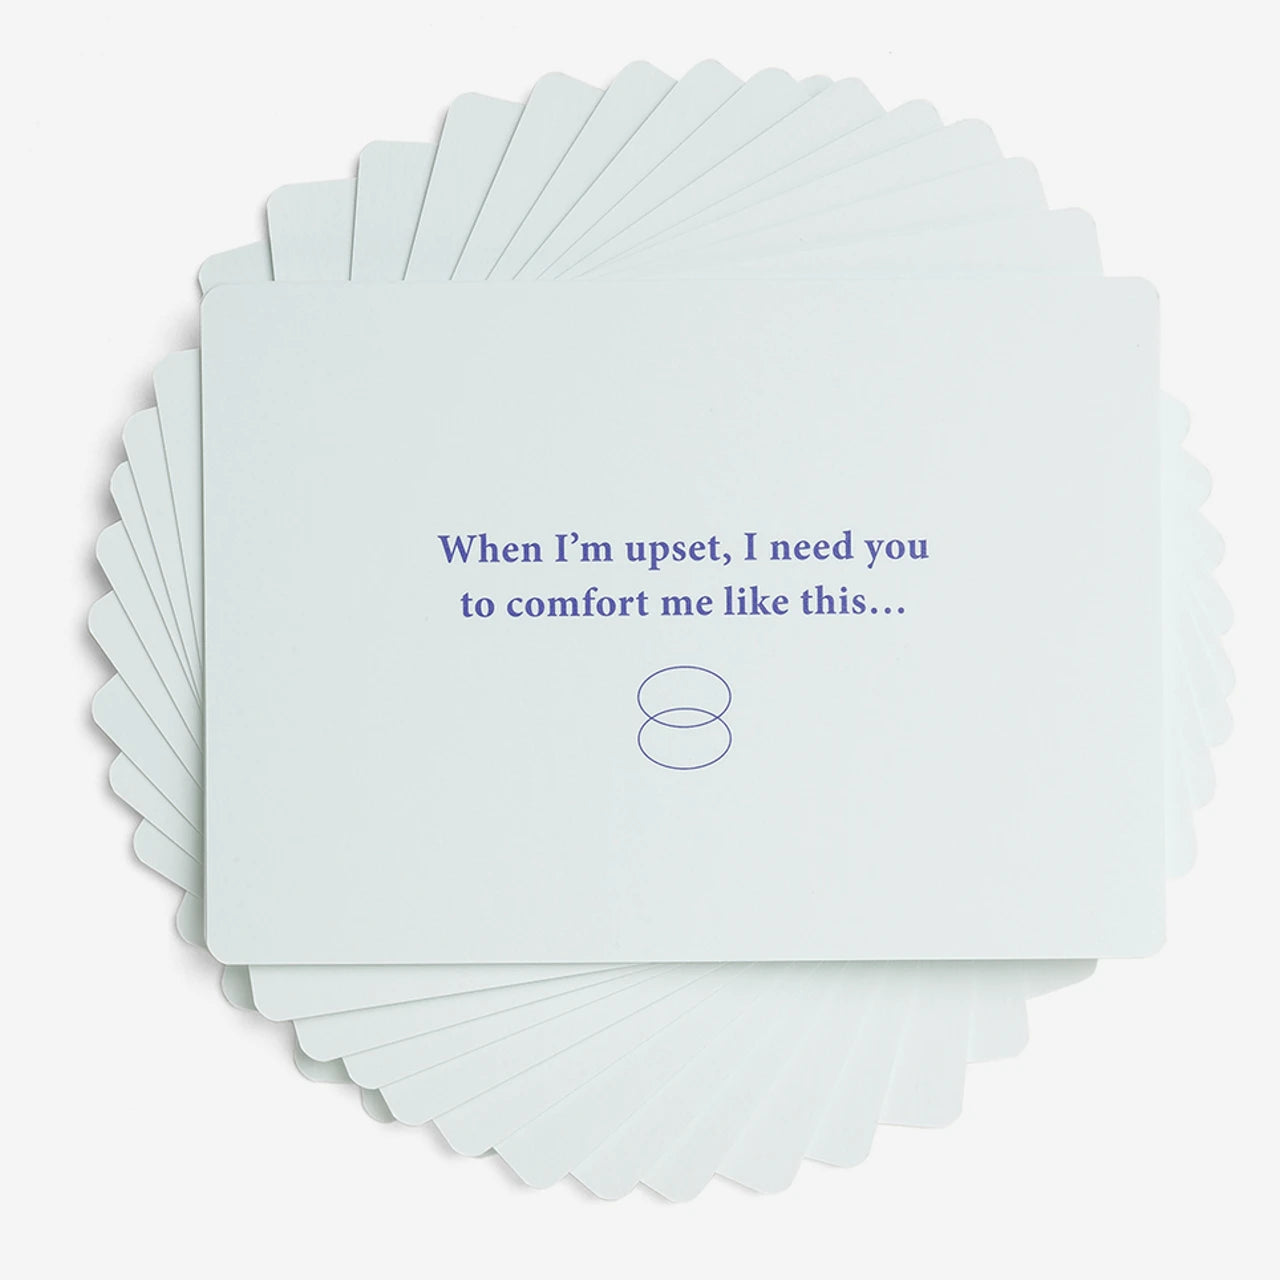 Emotional Conversation Cards: Discussions to Keep Love True